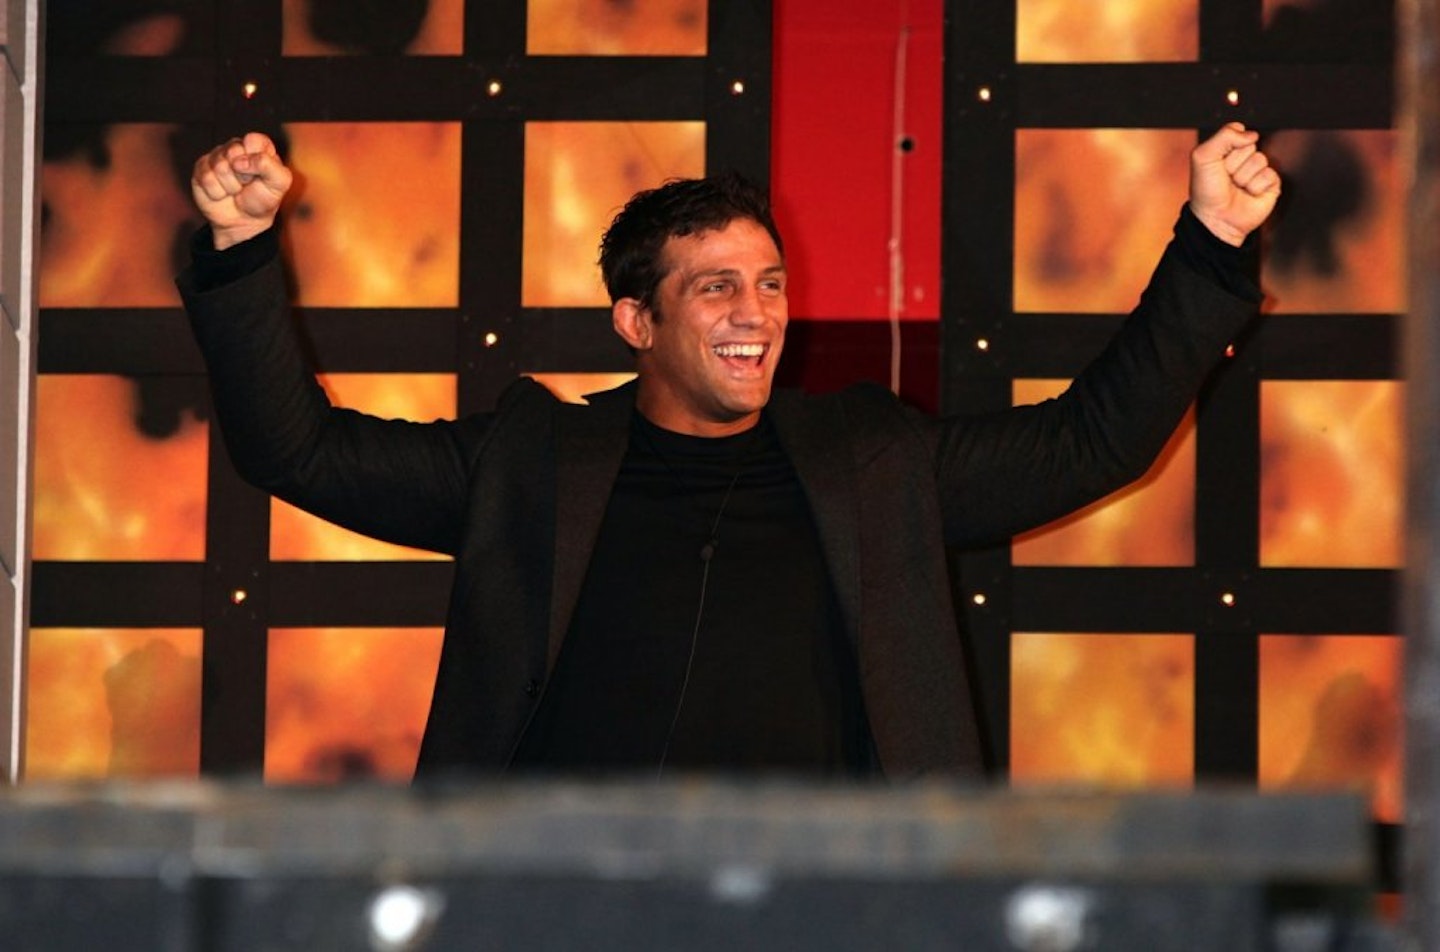 Alex Reid celebrating by holding arms up in the air